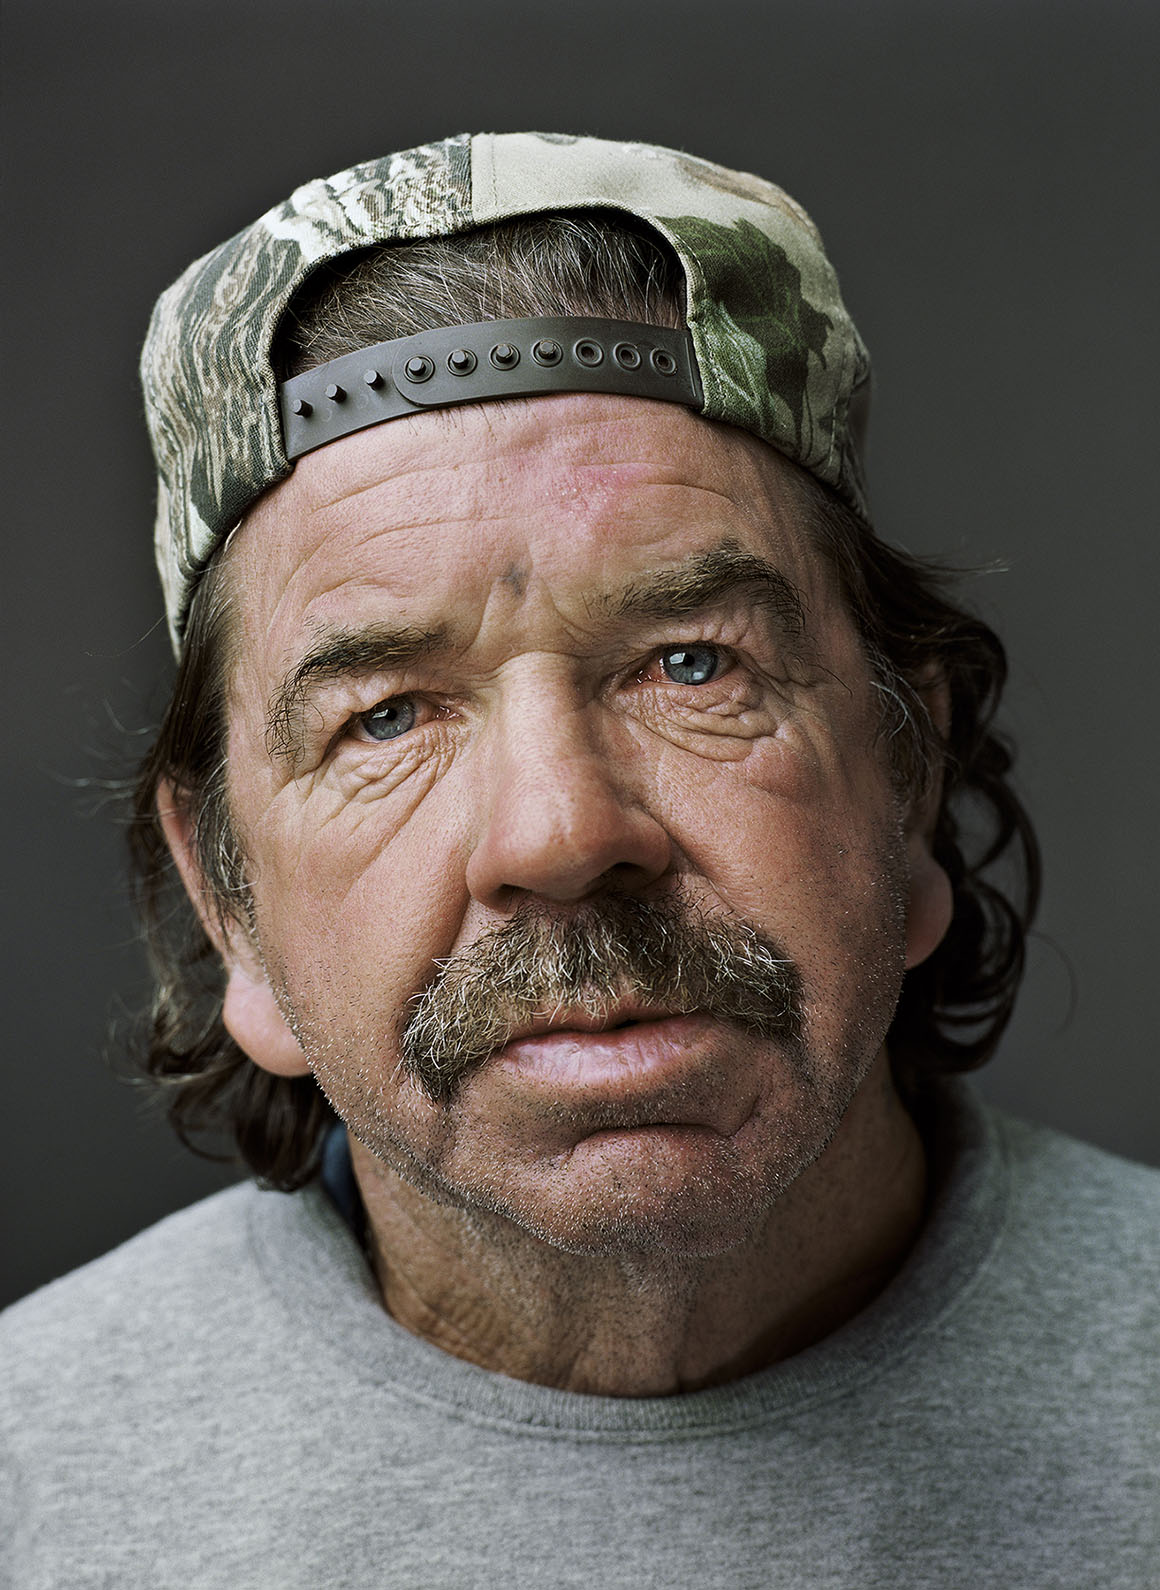 USA. "Down and Out in the South": Studio portraits of homeless people in Atlanta (GA), Columbia (SC) and the Mississippi Delta.  Jesse (b. Gadsden, AL, 1954), photographed in Columbia, SC, September-October 2010. 